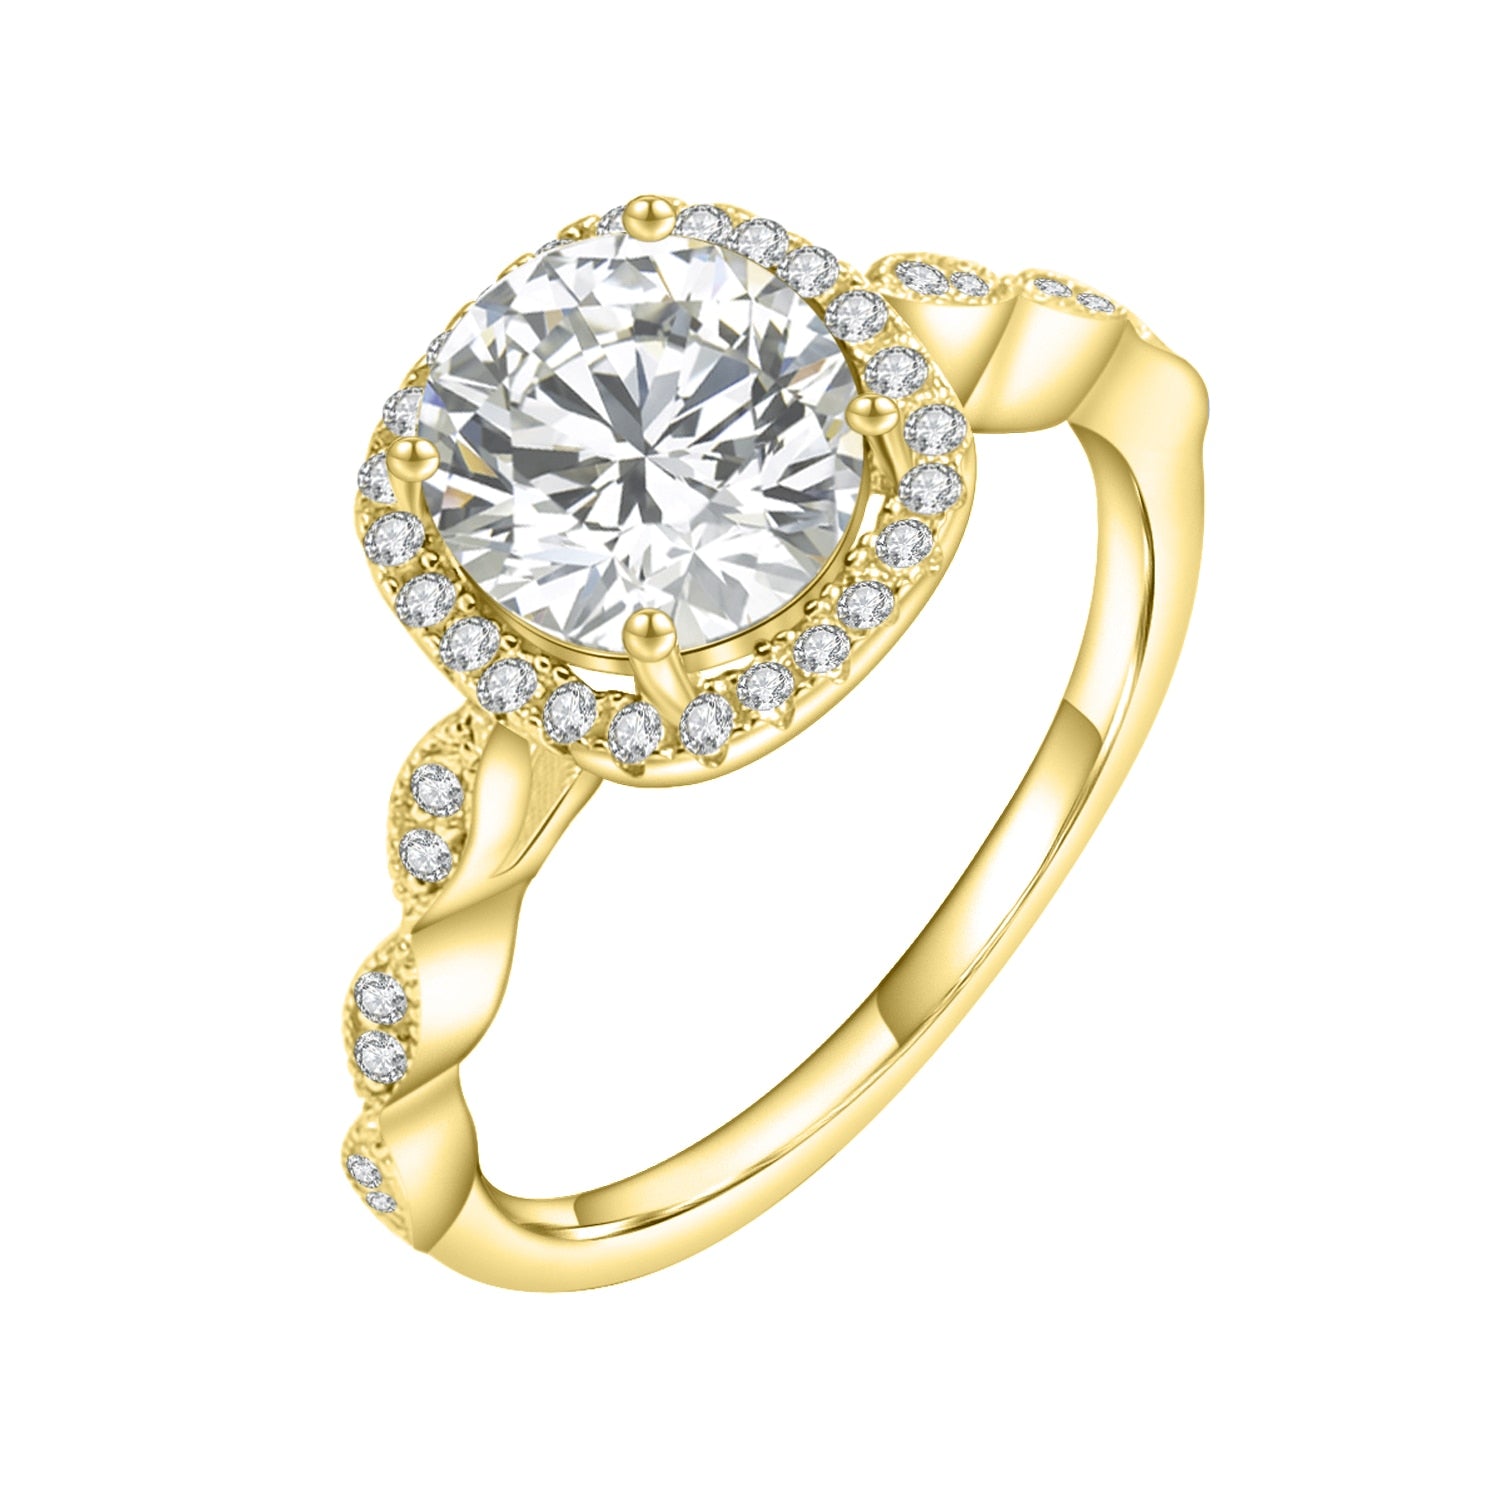 A gold squared halo ring set with a 2CT round moissanite on a scalloped gem encrusted band.